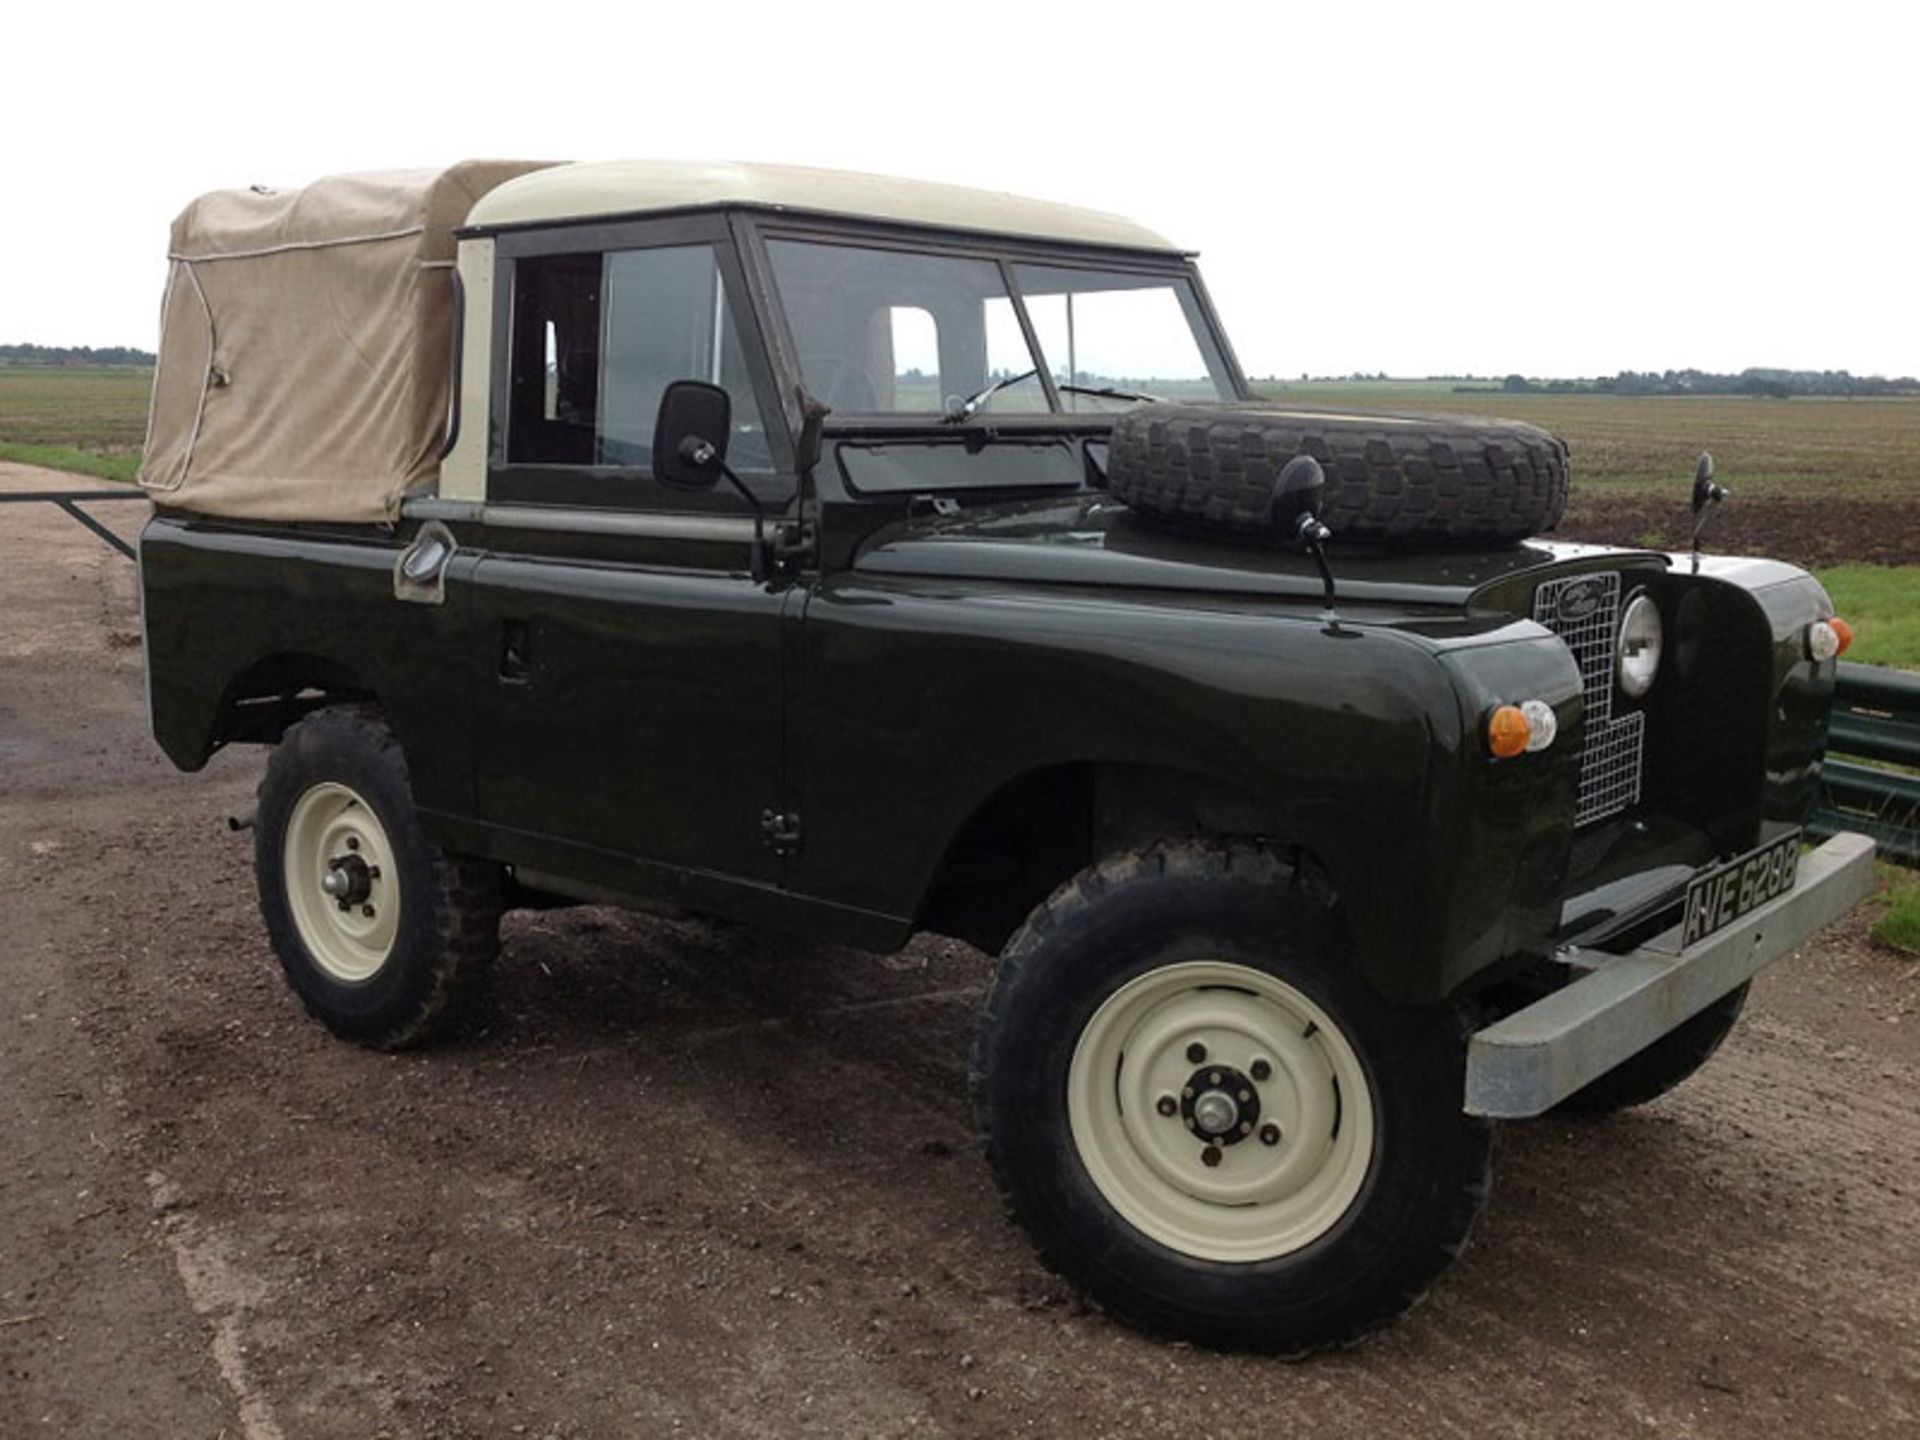 - Restored on a new chassis in 2014

- Finished in Deep Bronze Green with Limestone roof

- MoT to - Image 2 of 5